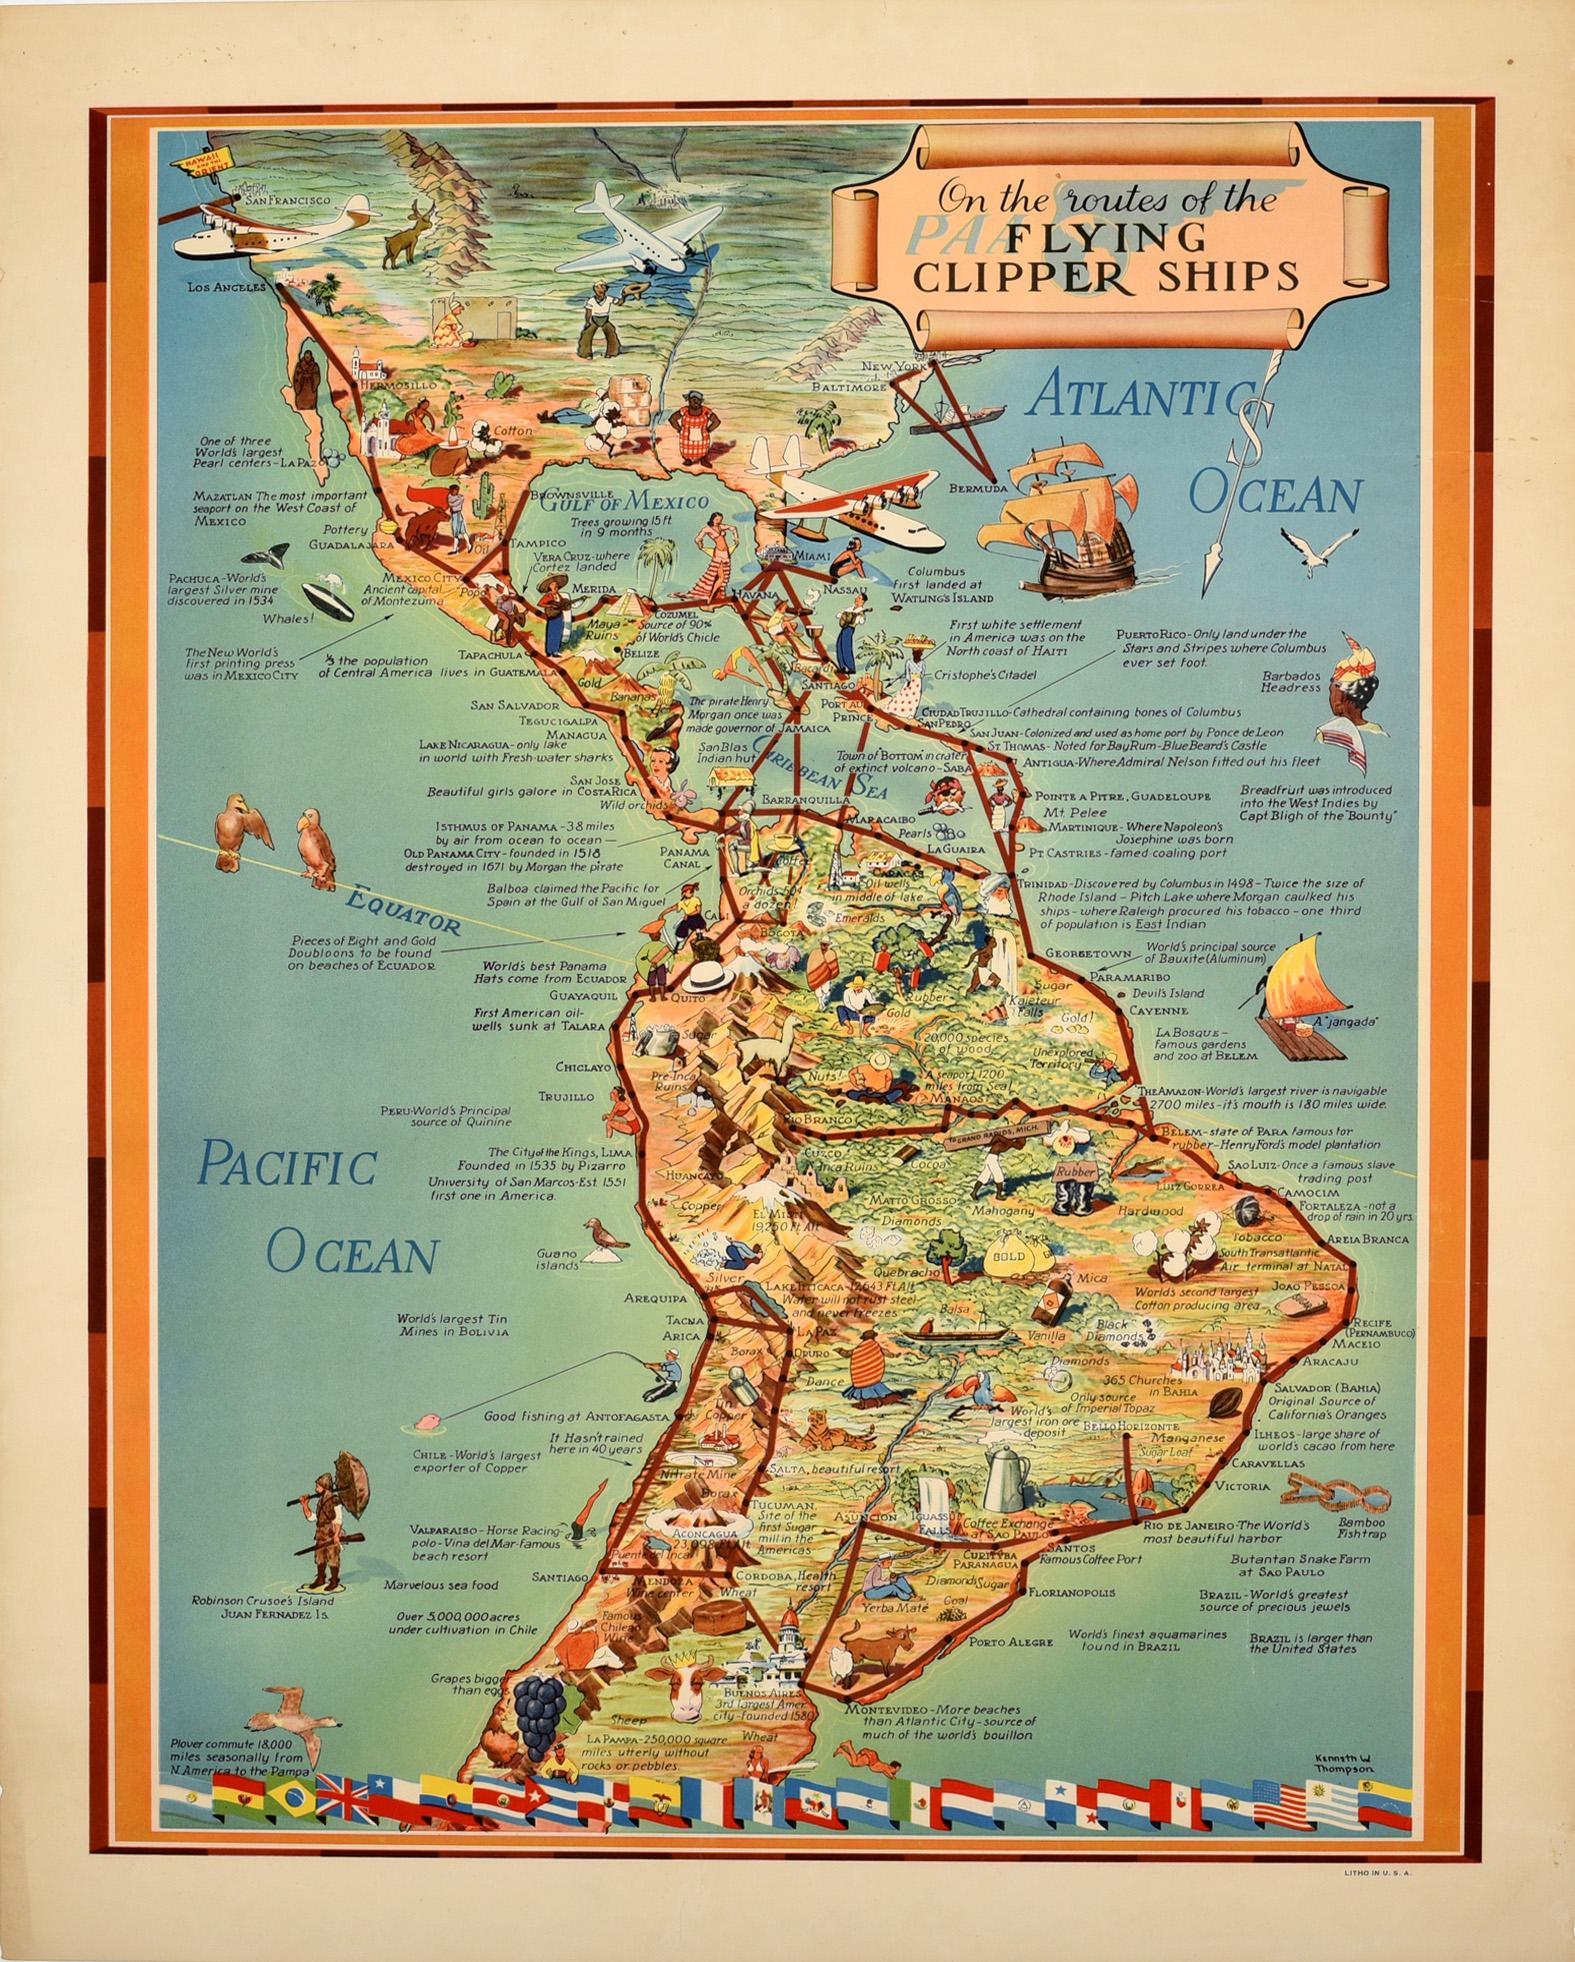 Kenneth W. Thompson Print - Original Vintage Travel Poster Pan Am Flying Clipper Ships South America Map